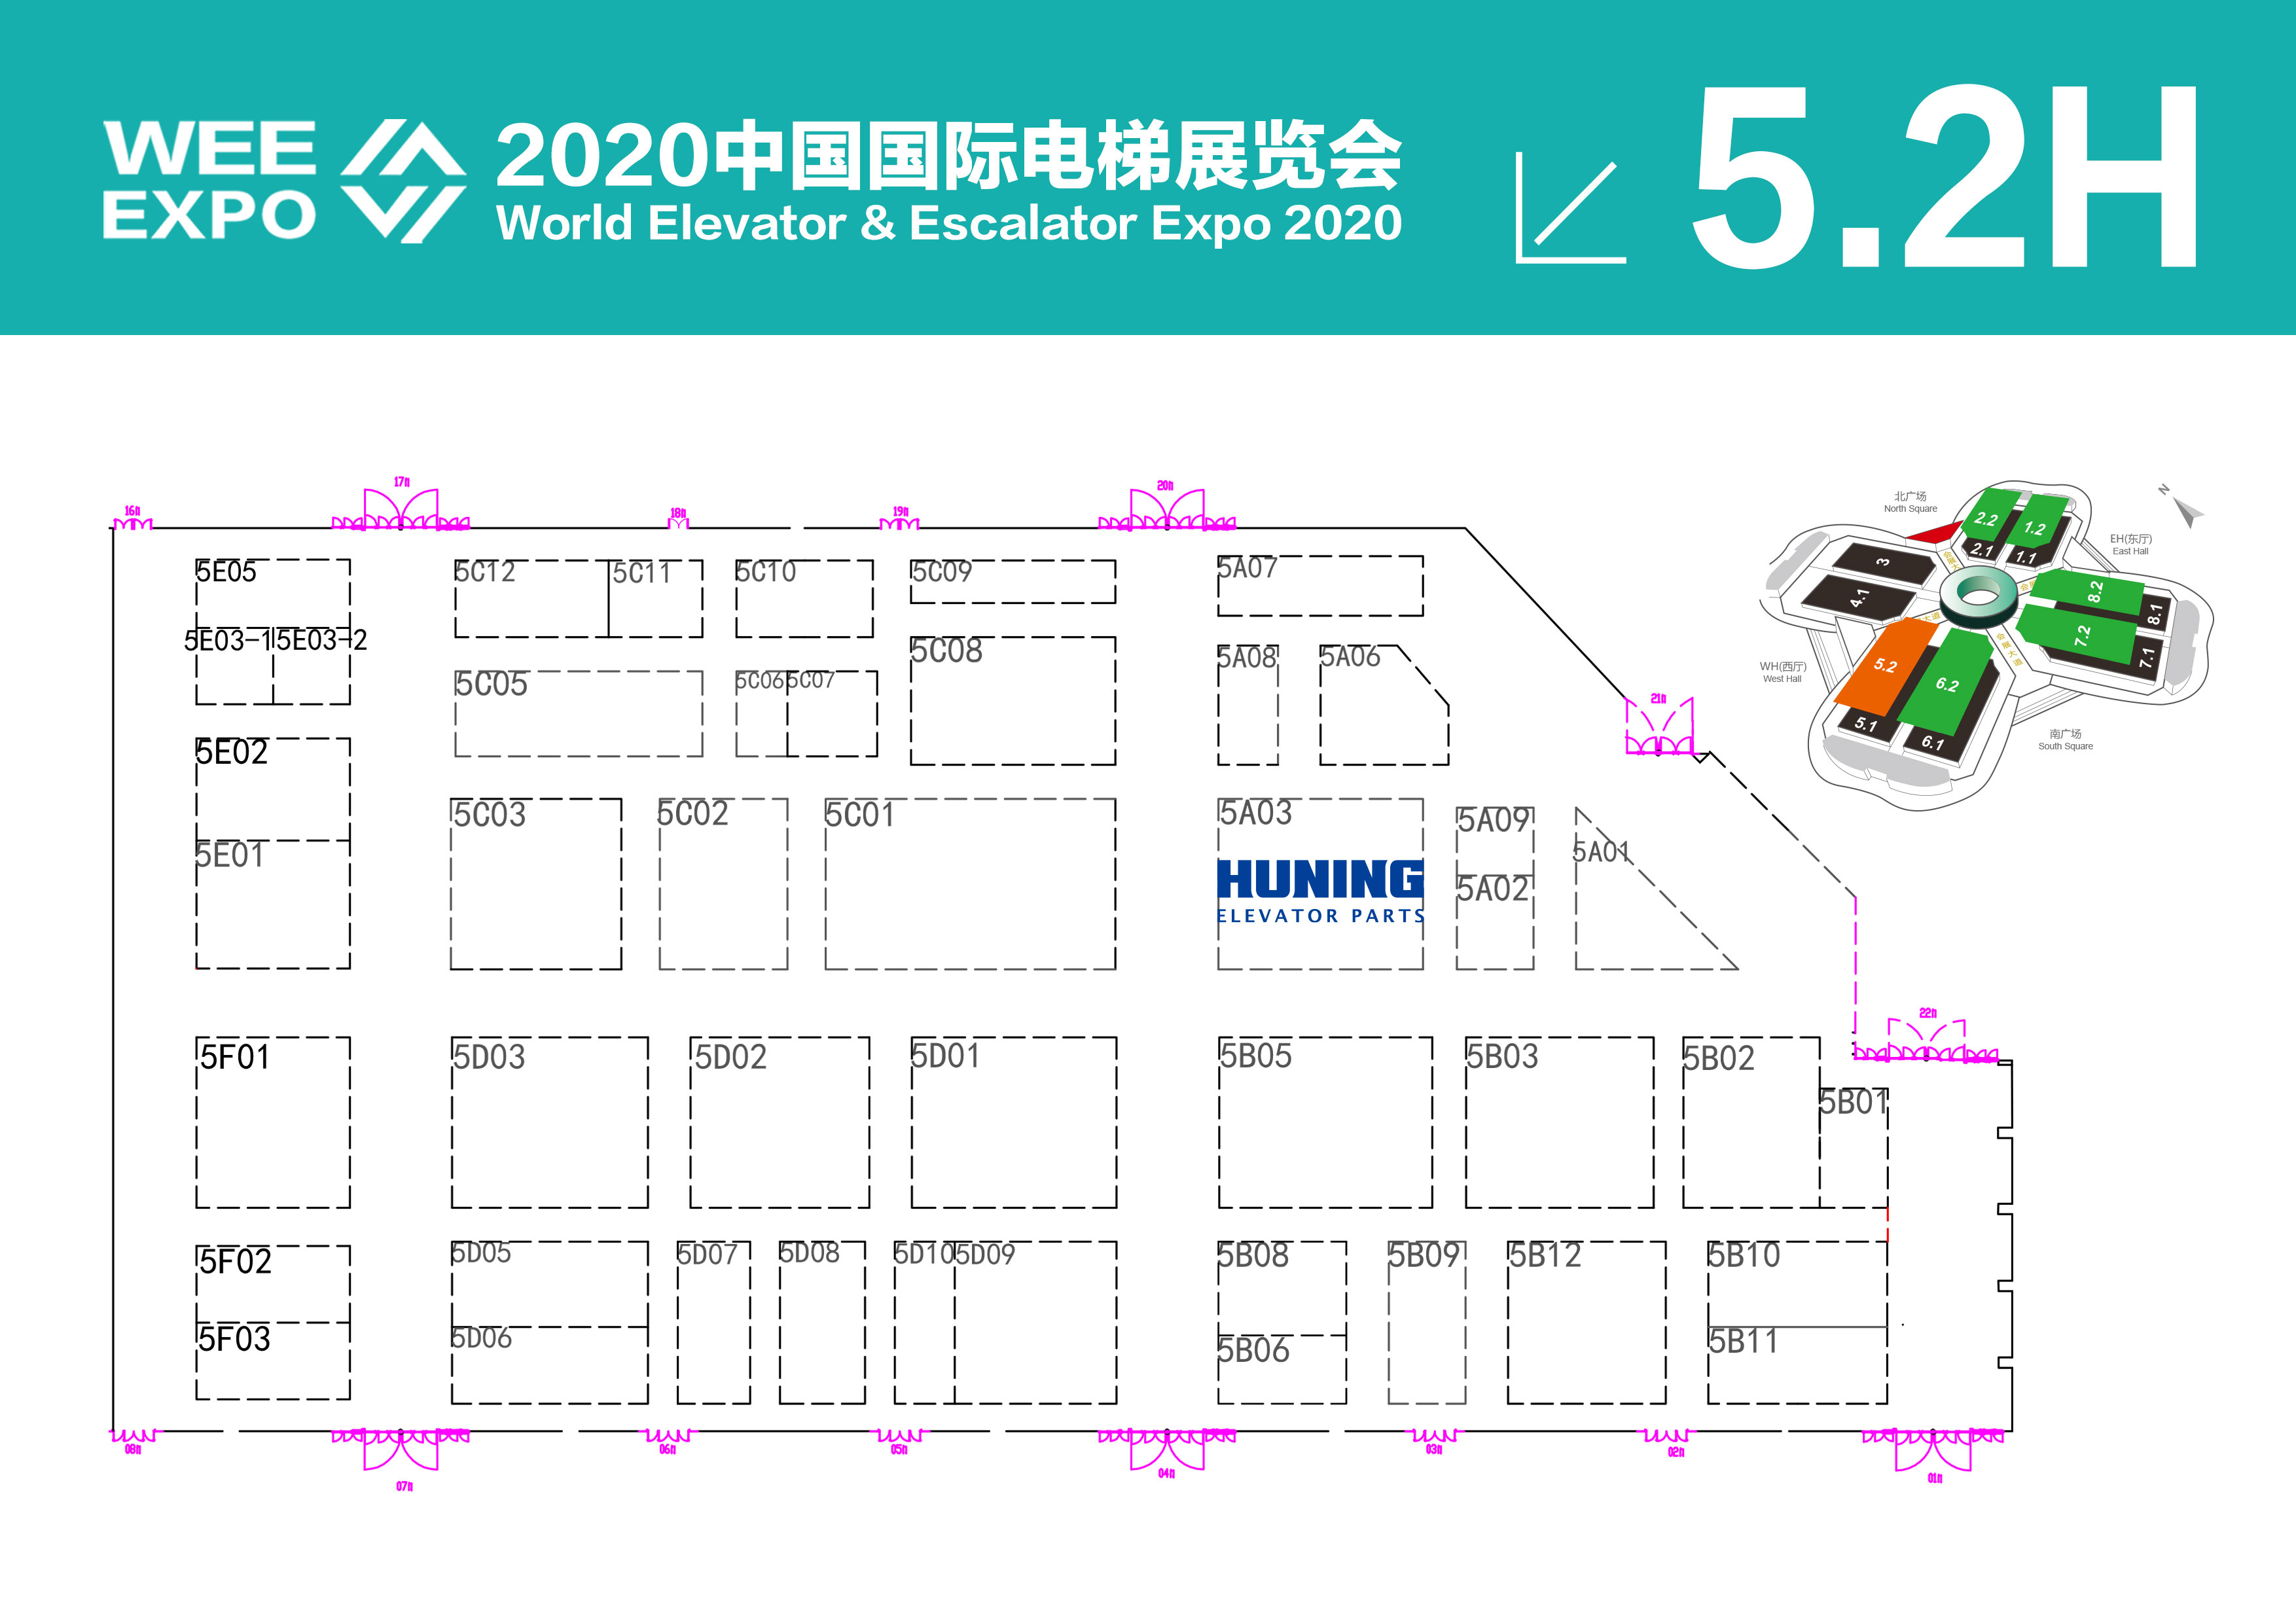 Huning shares participated in the 2020 China International Elevator Exhibition